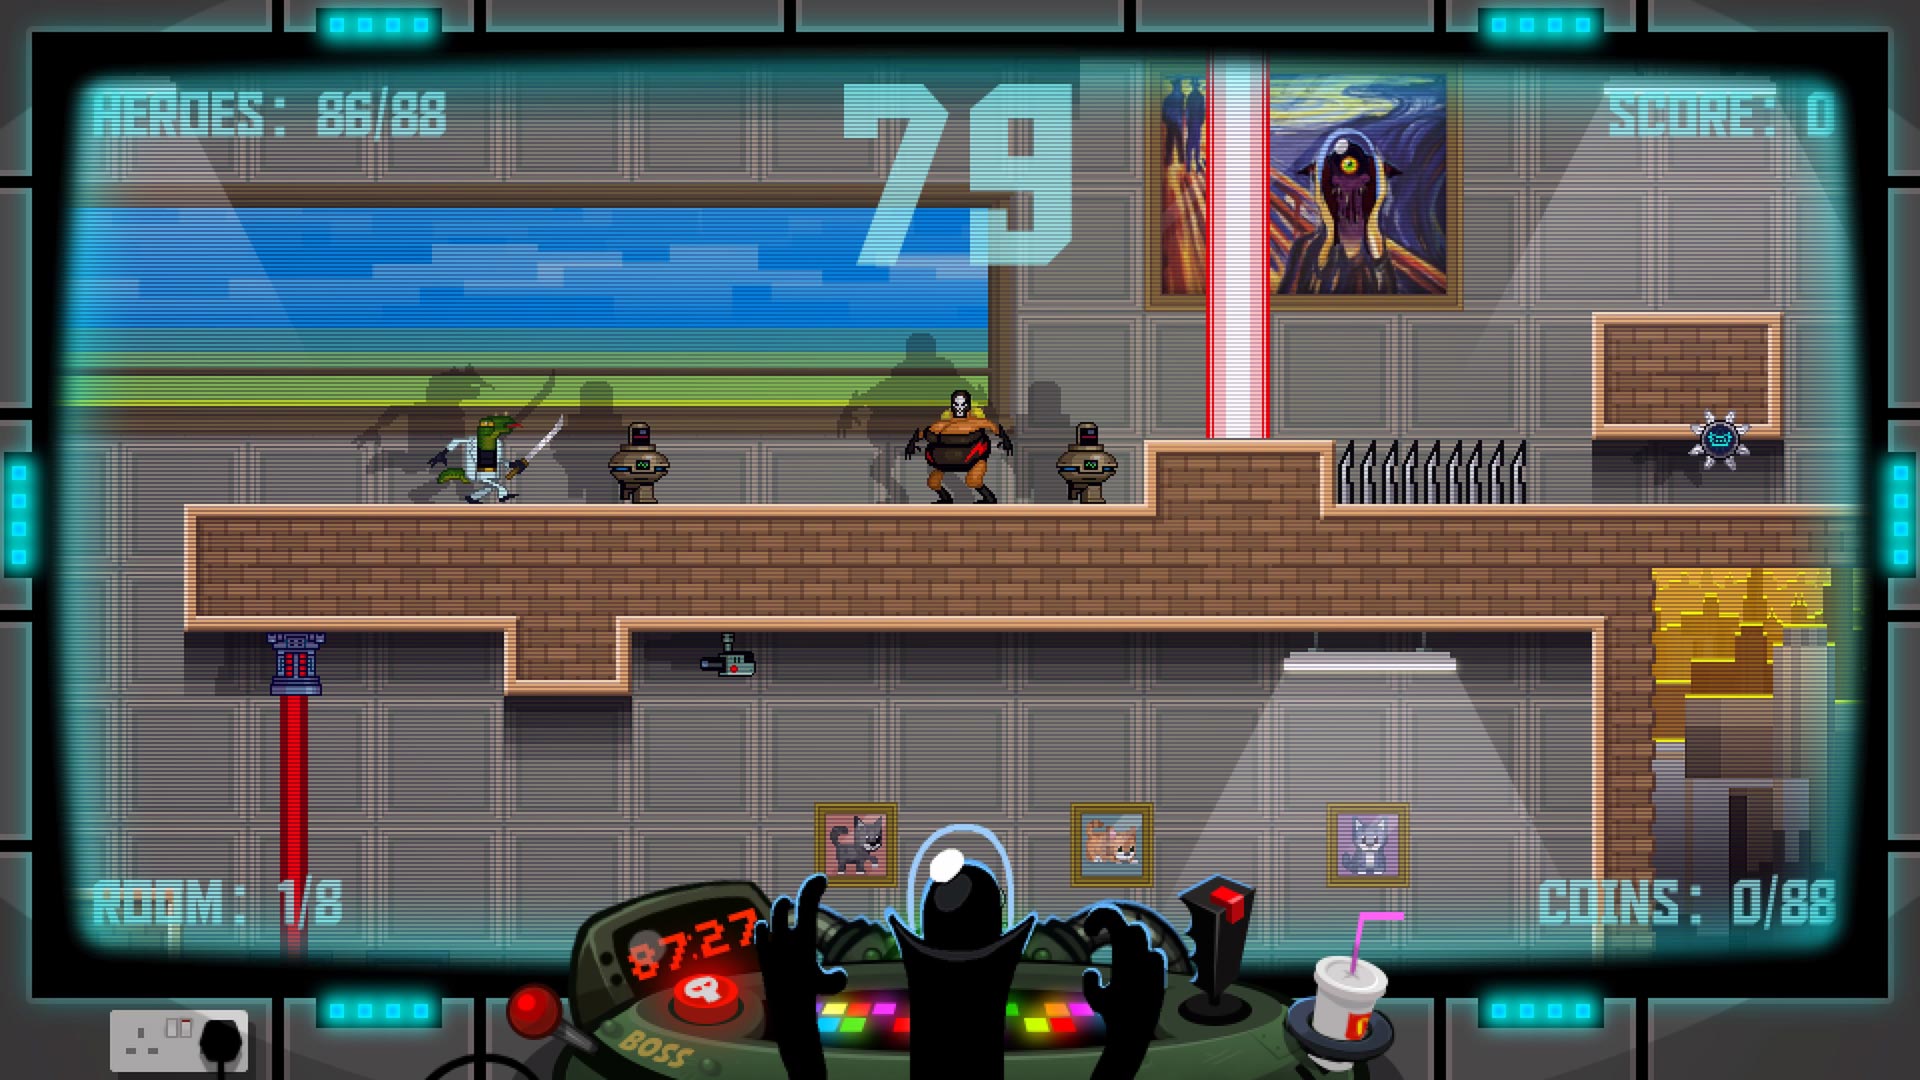 88 Heroes – H8 Mode Activated! Featured Screenshot #1